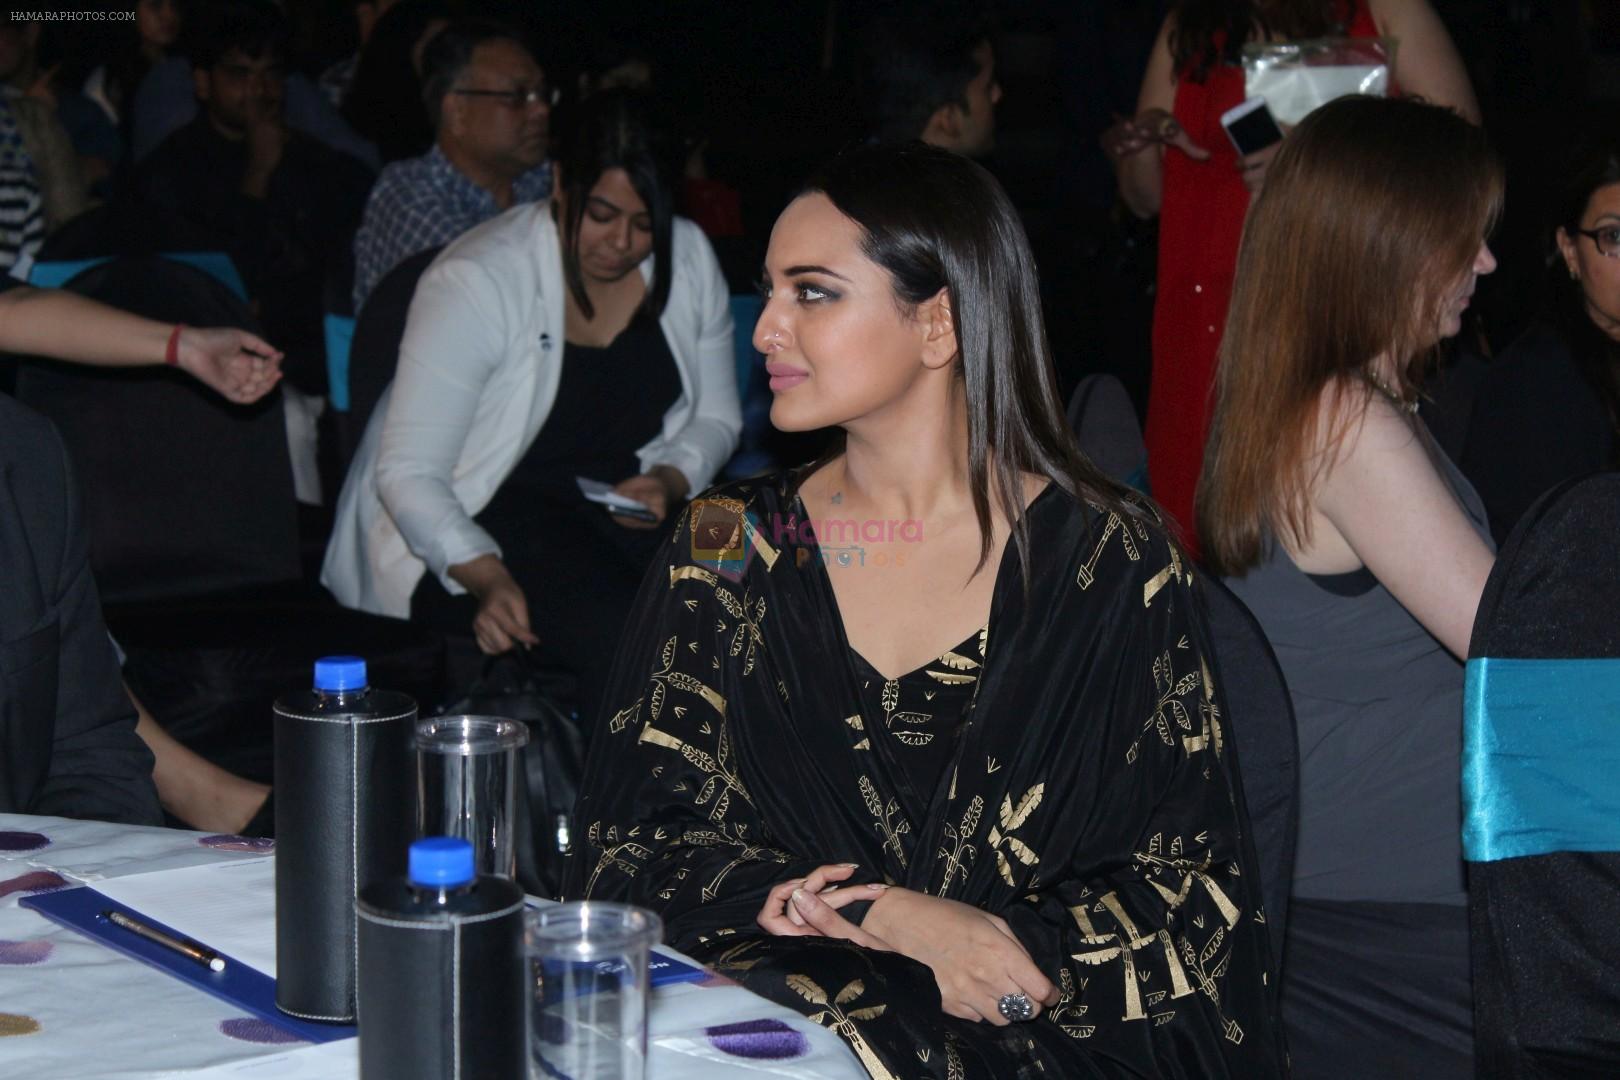 Sonakshi Sinha Attend The Awards Night For Its Short Film Festival Based On Women's Safety & Empowerment on 8th Dec 2017